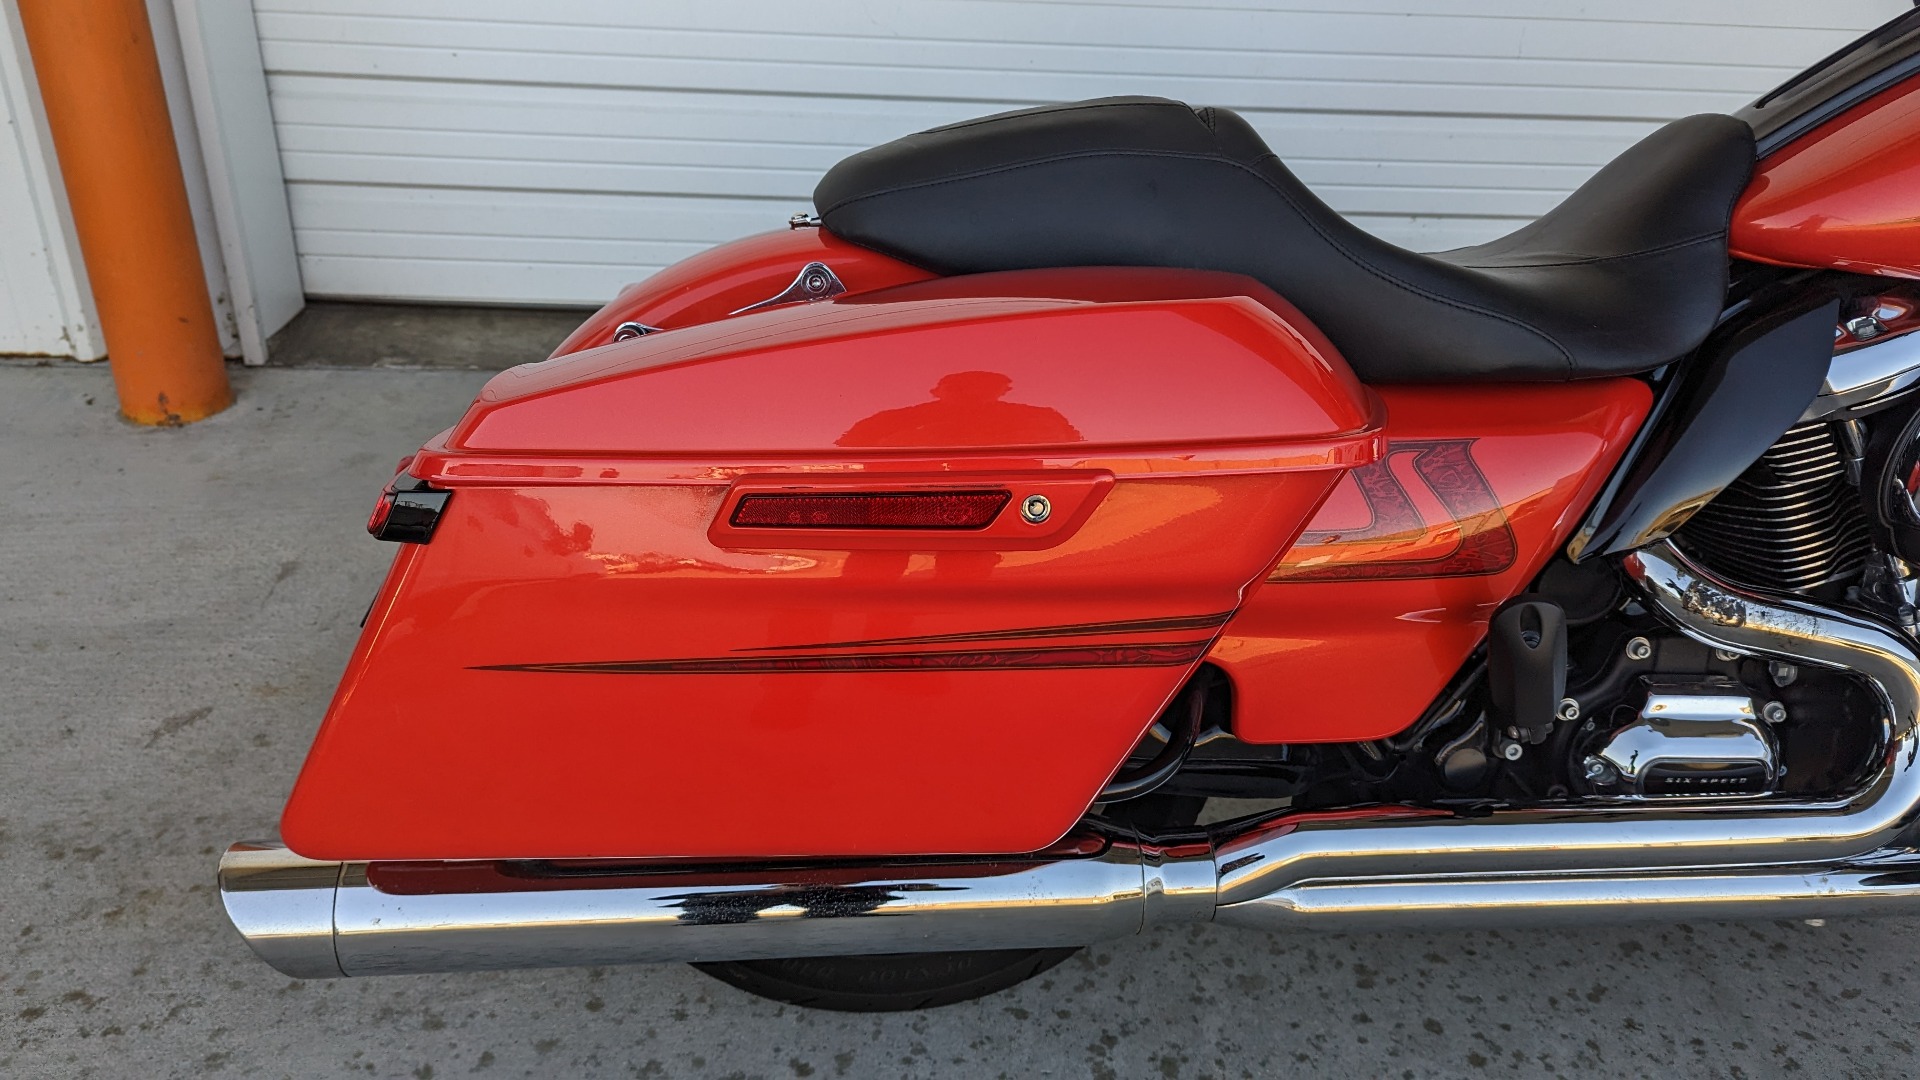 harley street glide special for sale in arkansas - Photo 5